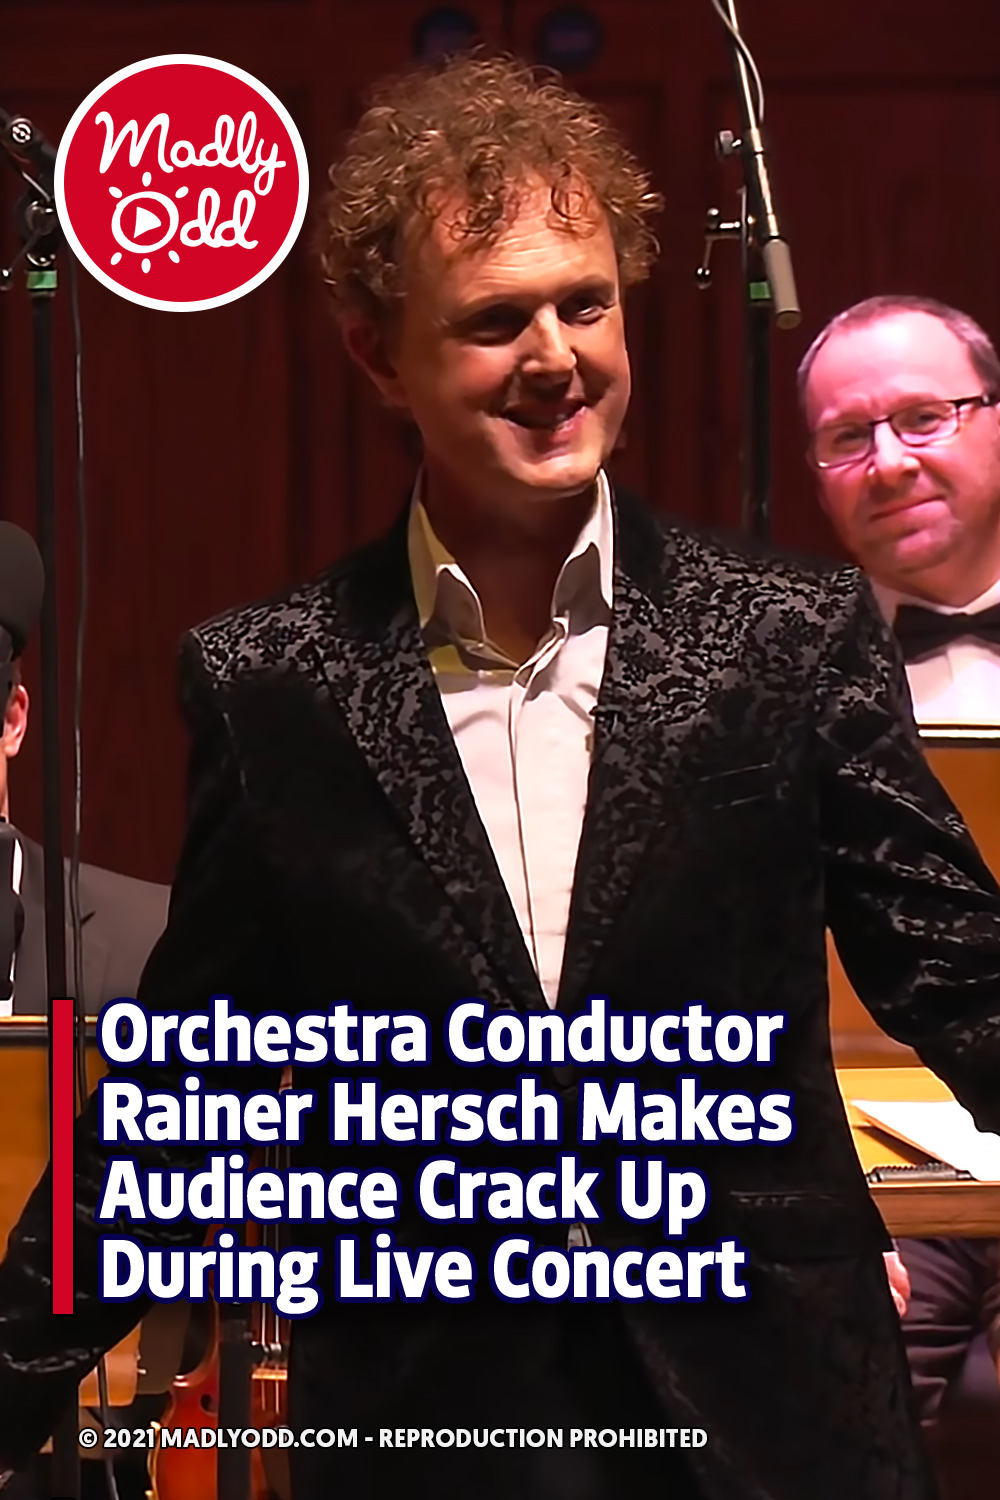 Orchestra Conductor Rainer Hersch Makes Audience Crack Up During Live Concert